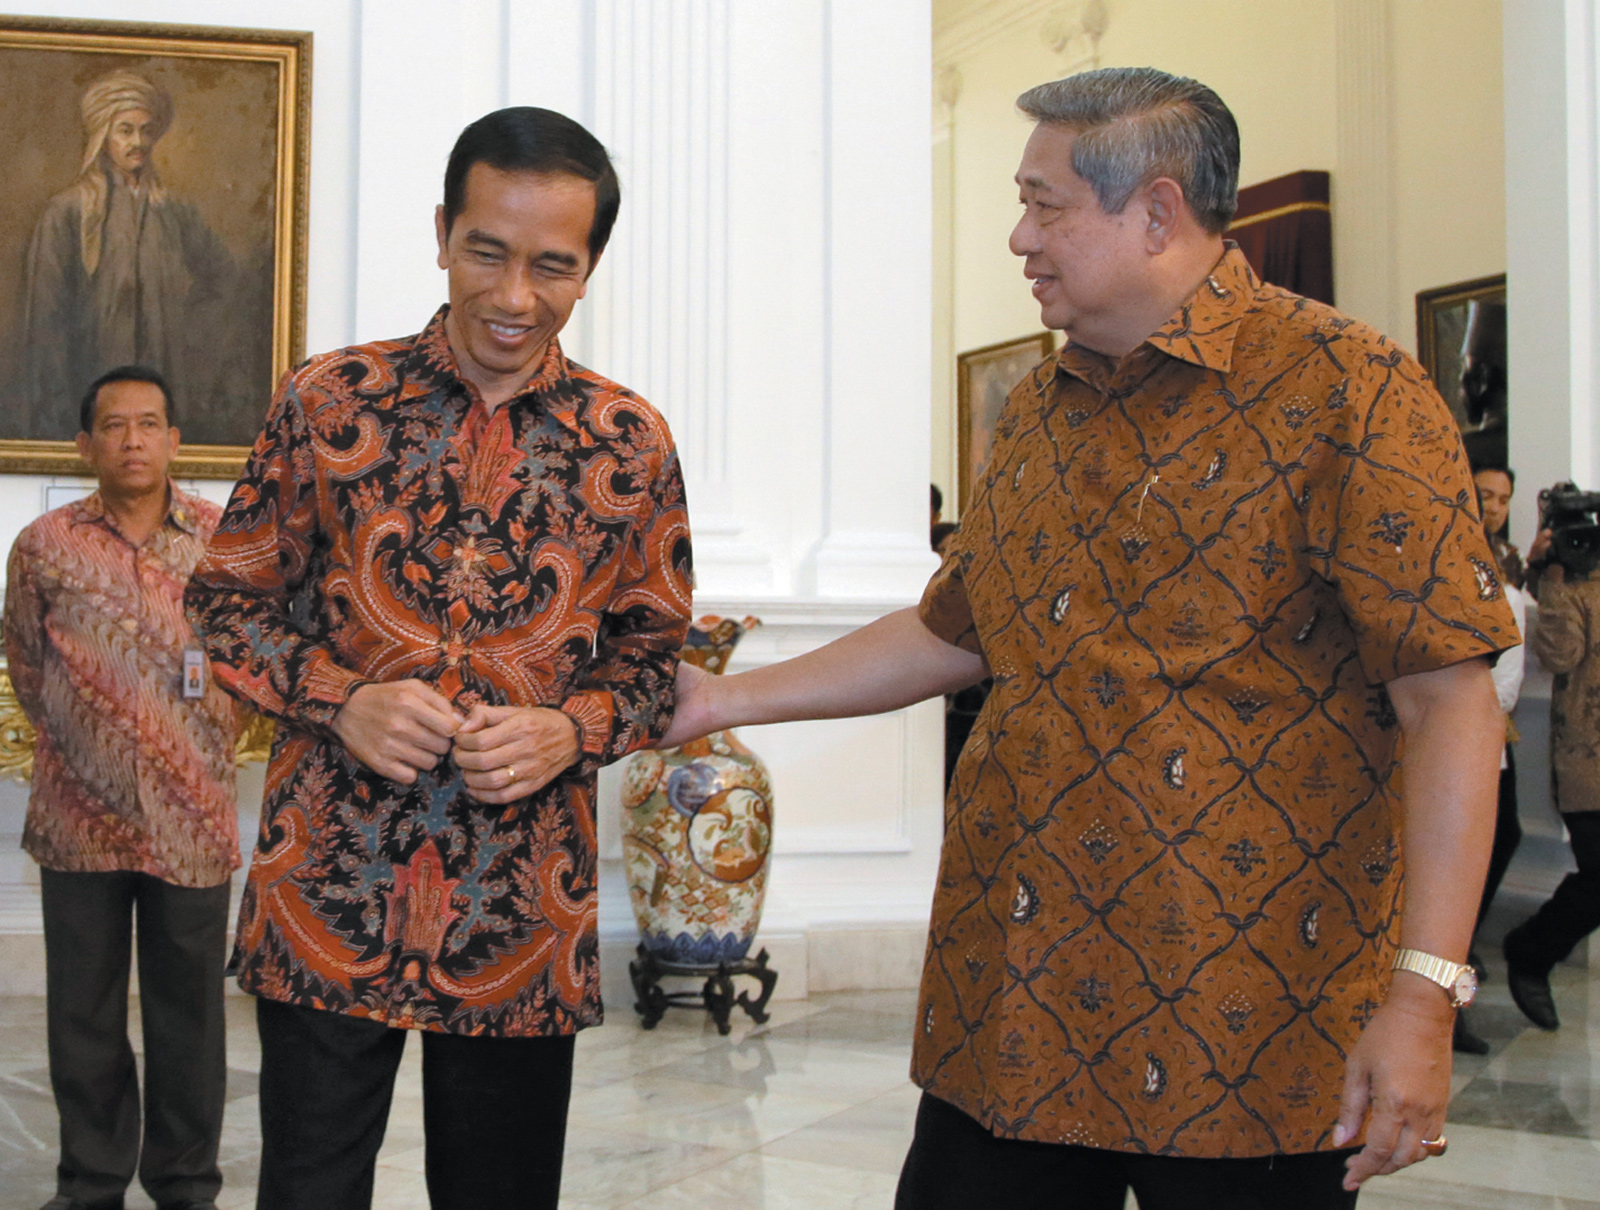 Indonesian President-Elect Joko Widodo (left) receiving a tour of the presidential palace from President Susilo Bambang Yudhoyono the day before Widodo’s inauguration, Jakarta, October 2014